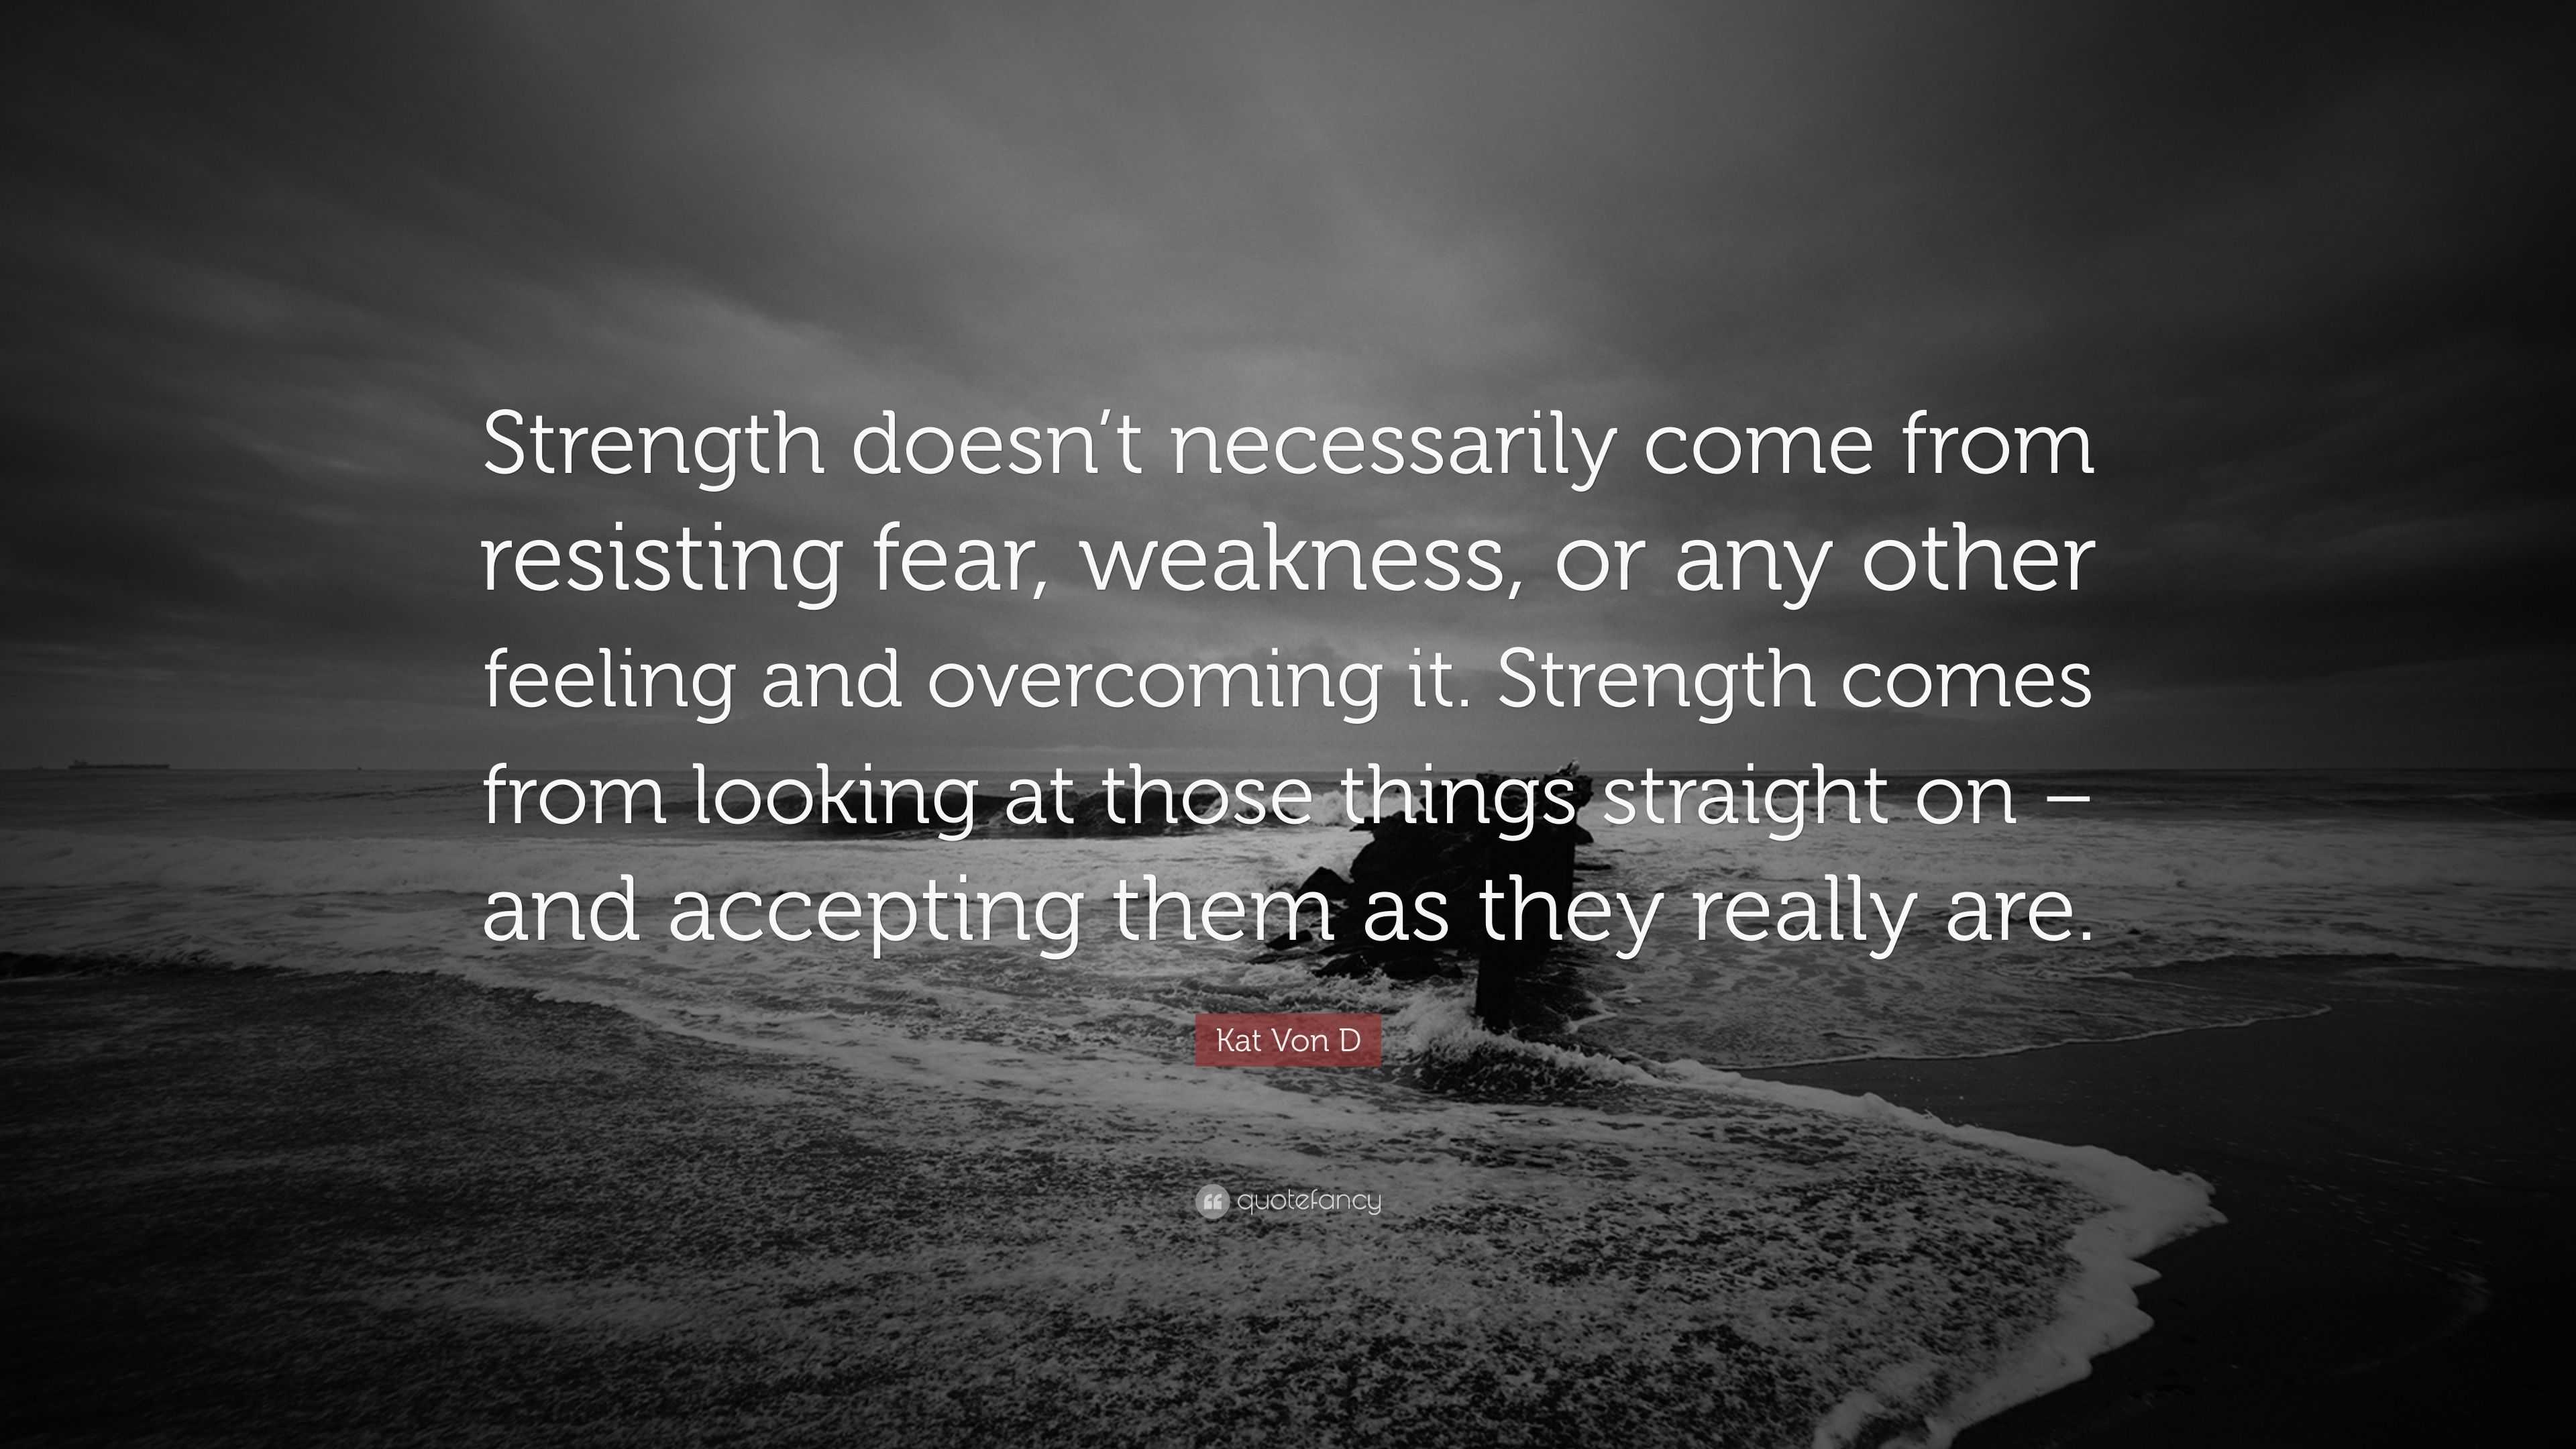 Kat Von D Quote: “Strength doesn’t necessarily come from resisting fear ...